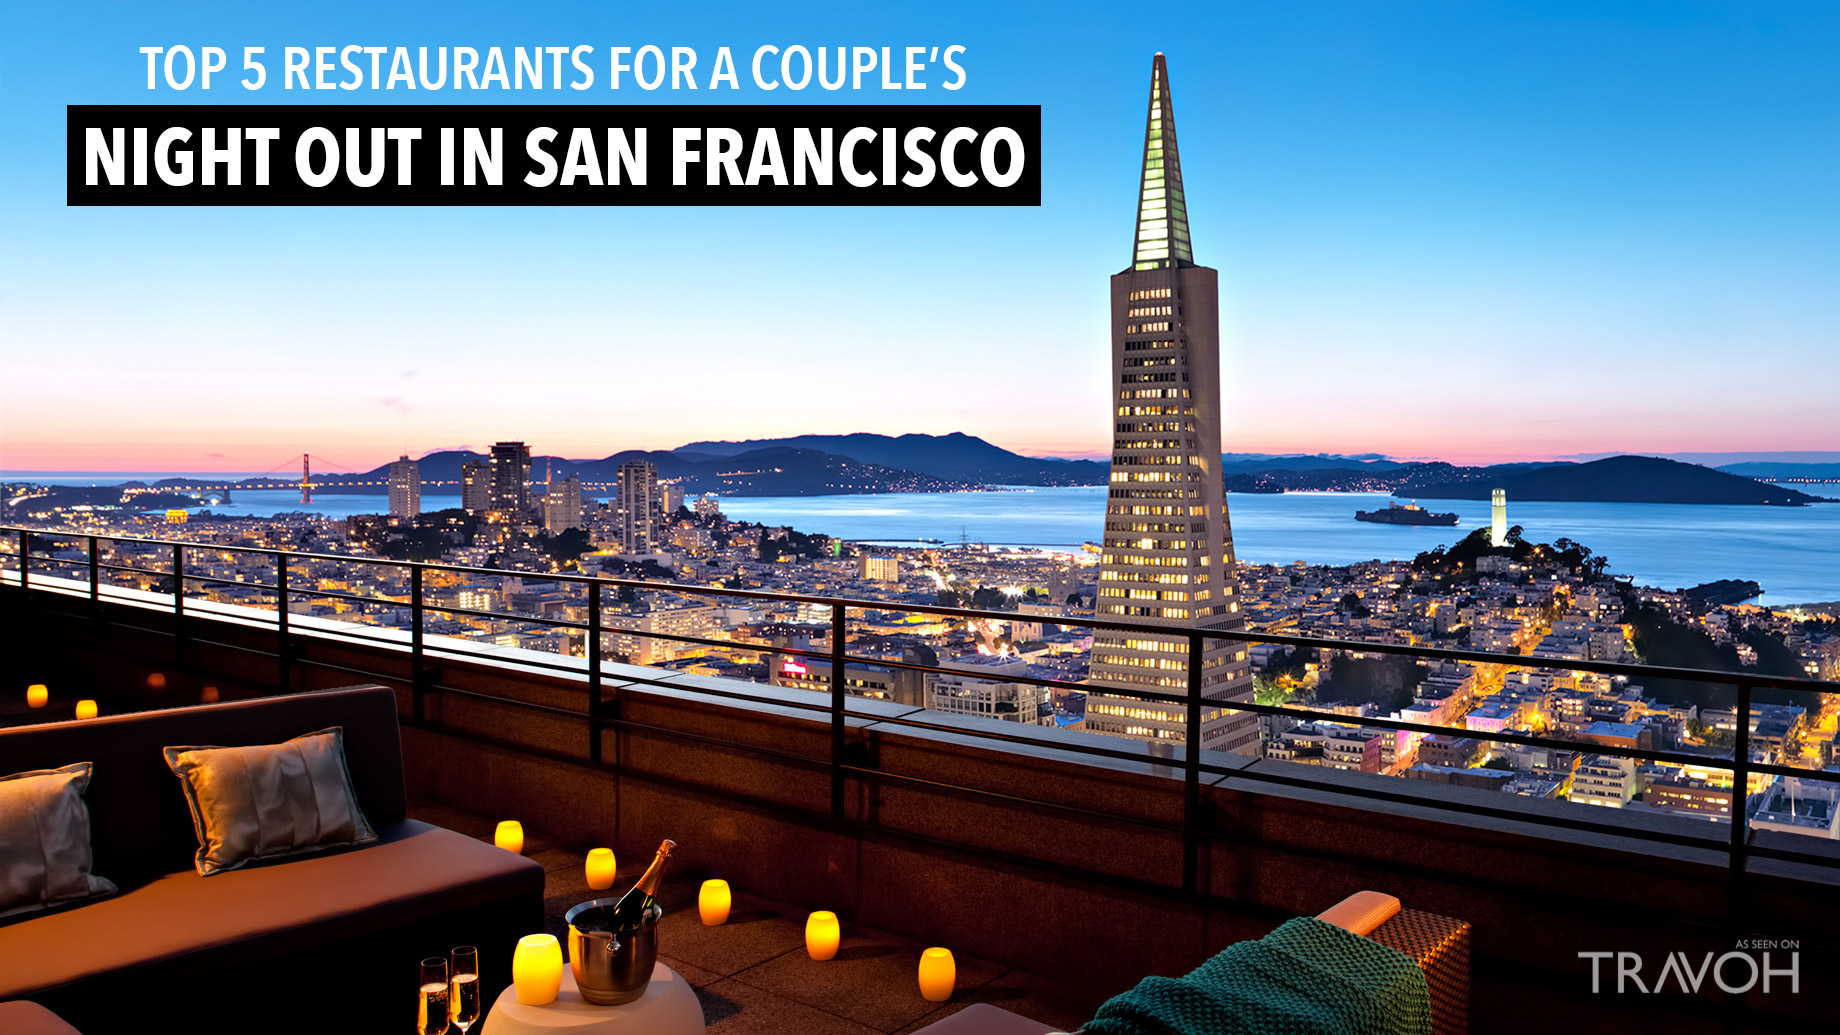 Top 5 Restaurants for a Couple’s Night Out in San Francisco